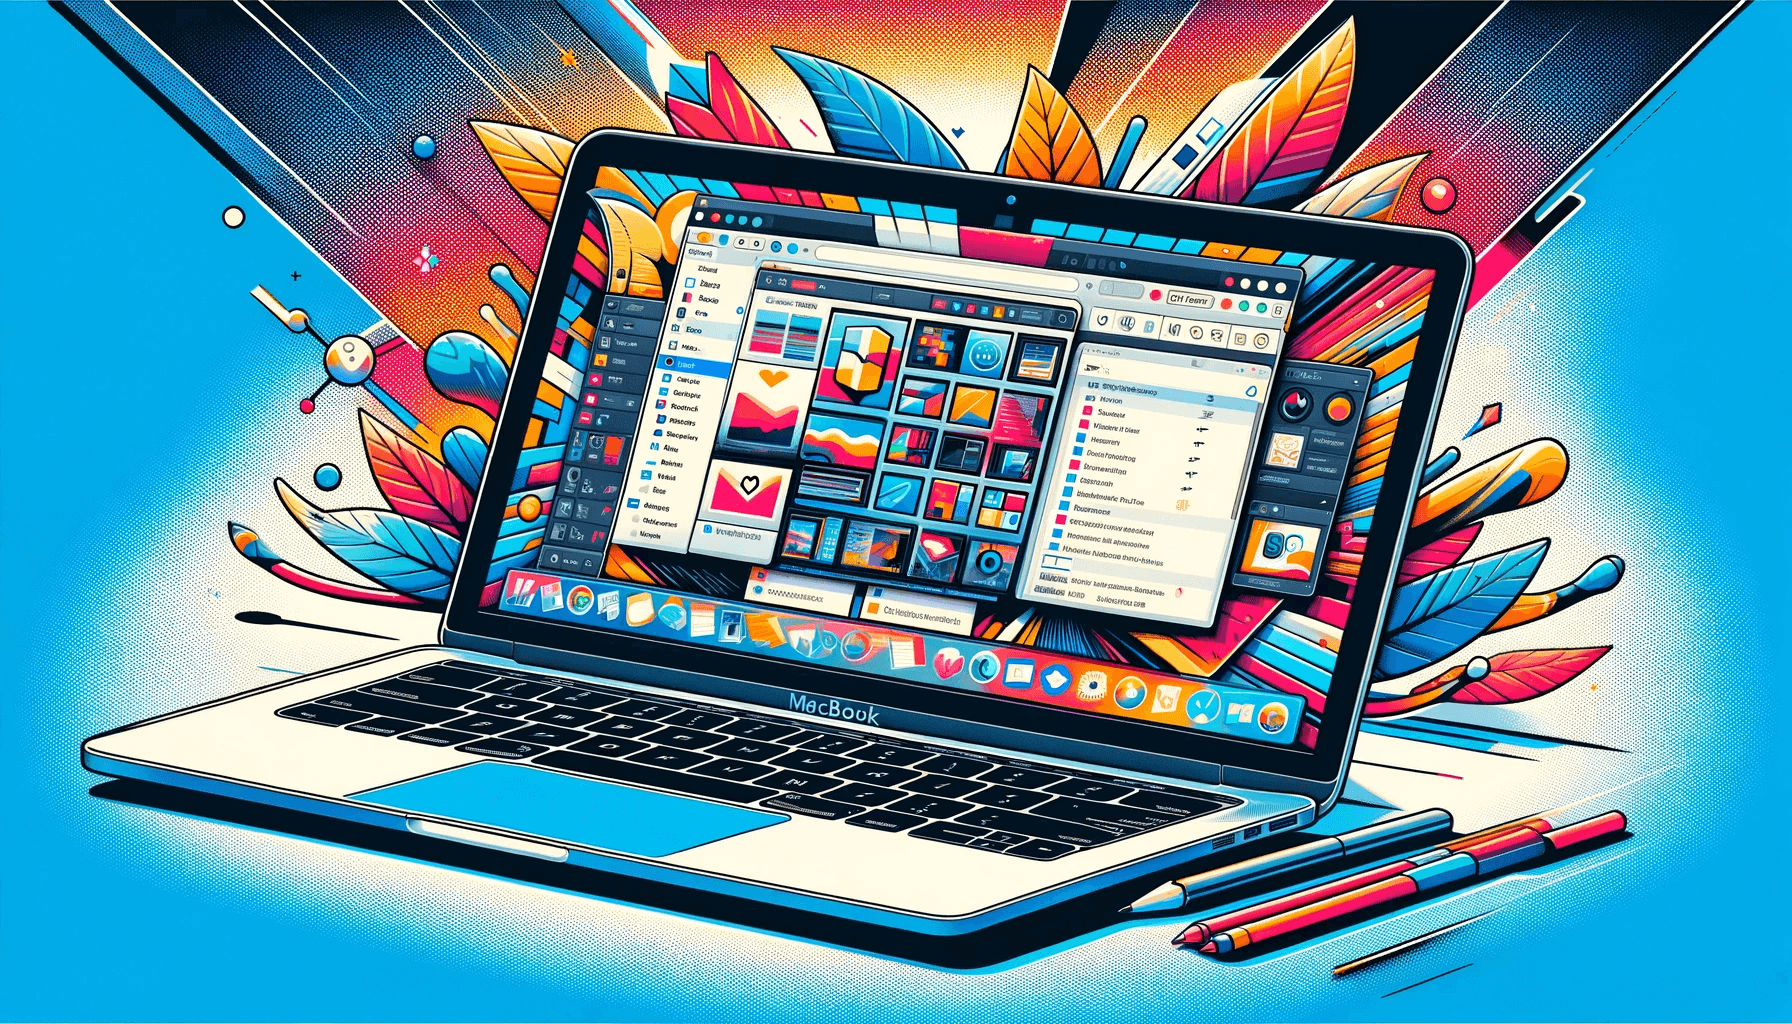 DALL·E 2023 11 21 10.05.16 A digital illustration of a print screen on a MacBook with a colorful background. The MacBook is open on a desk its screen displaying a recently cap